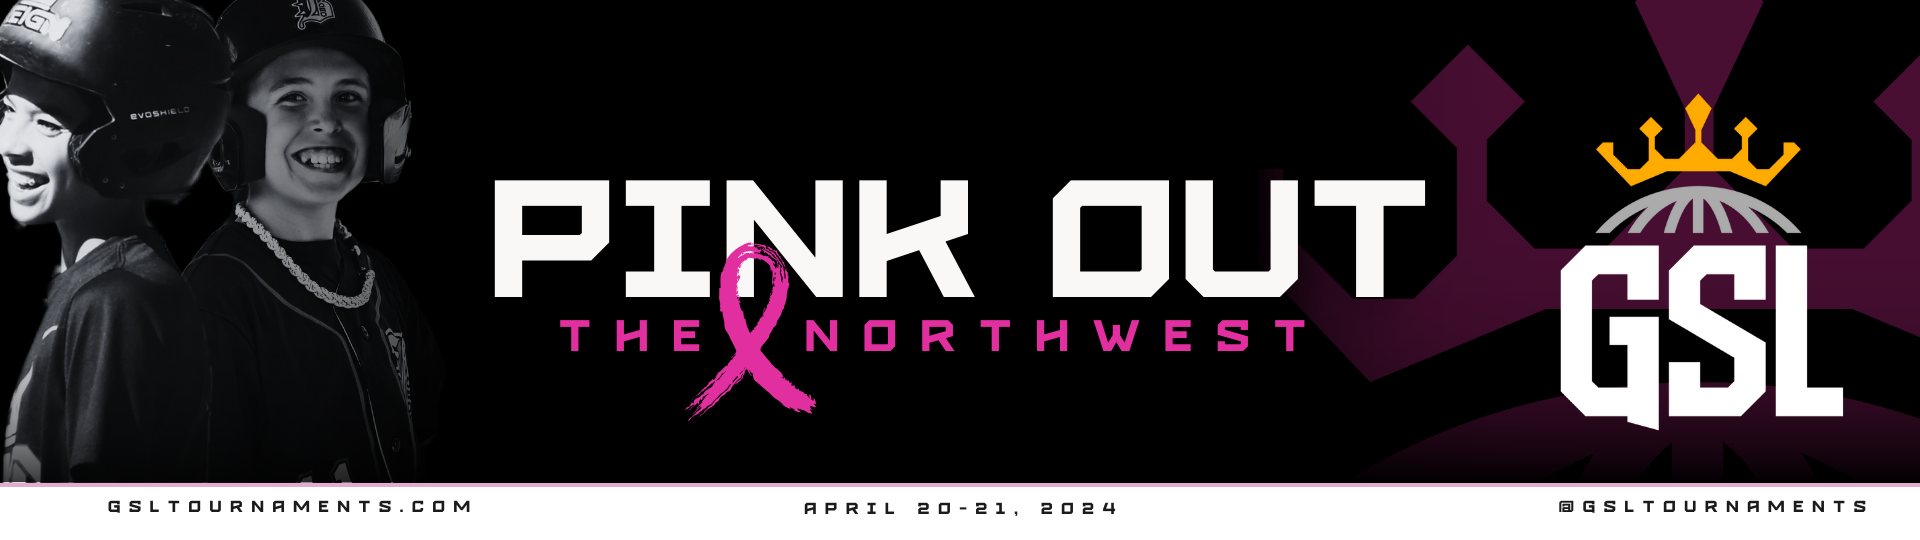 Pink Out the Northwest Tournament - GSL Tournaments